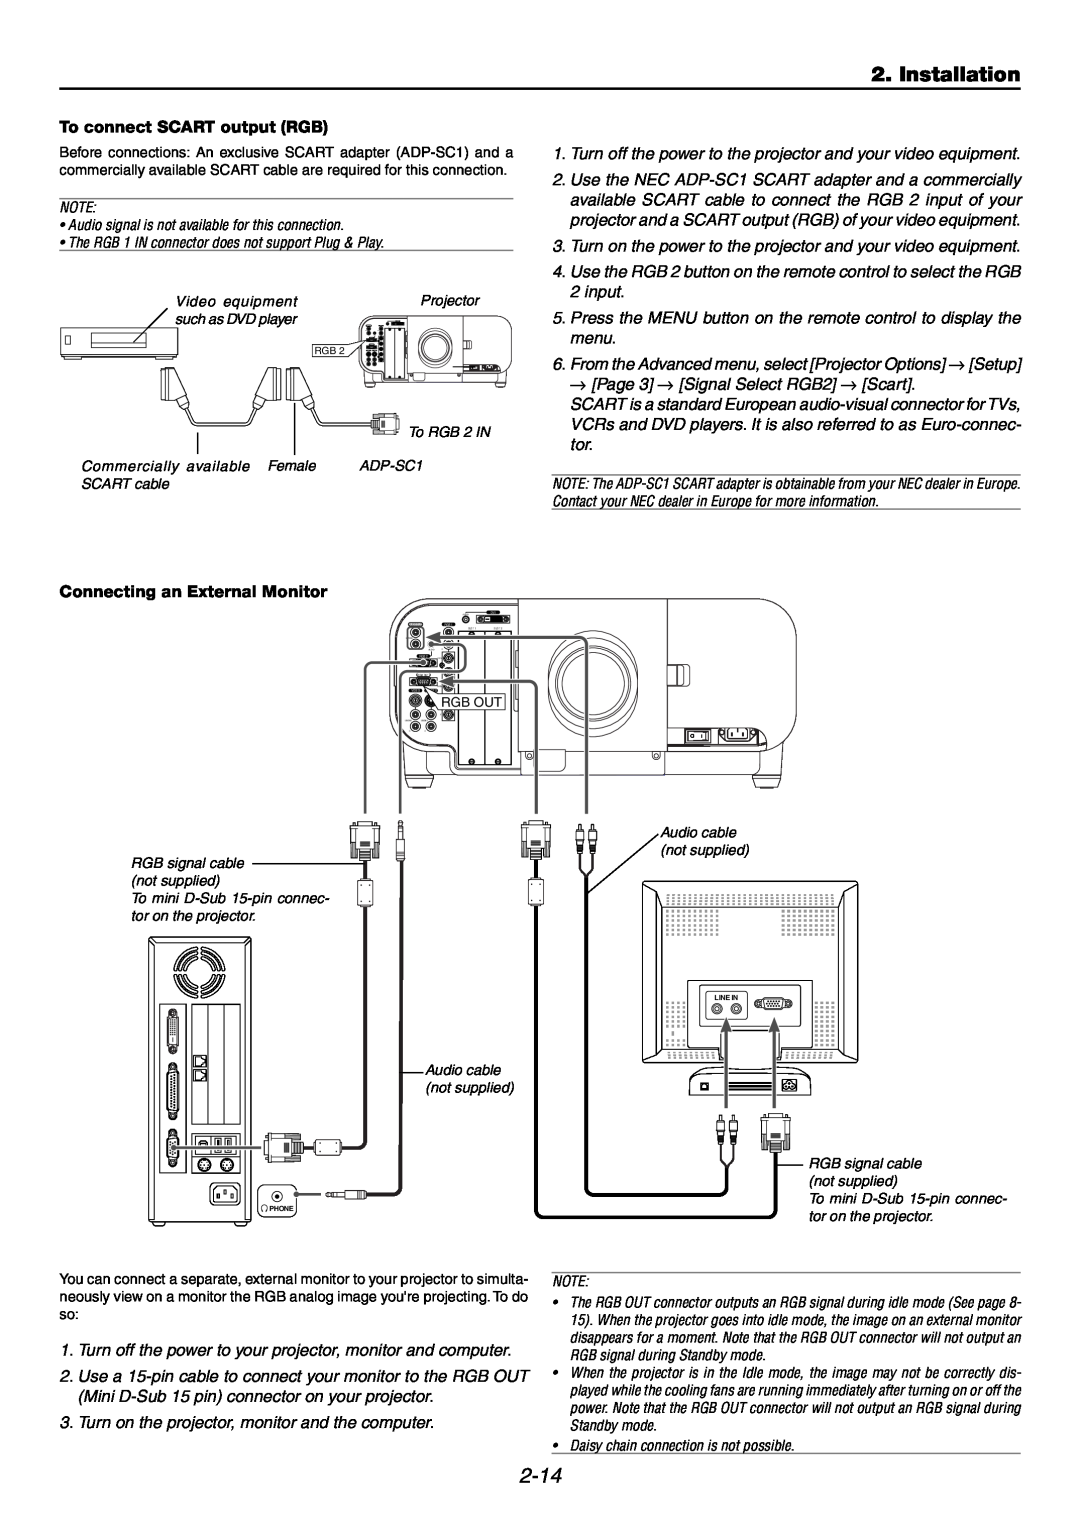 NEC GT6000 user manual Installation, 2-14, To connect SCART output RGB, Connecting an External Monitor 